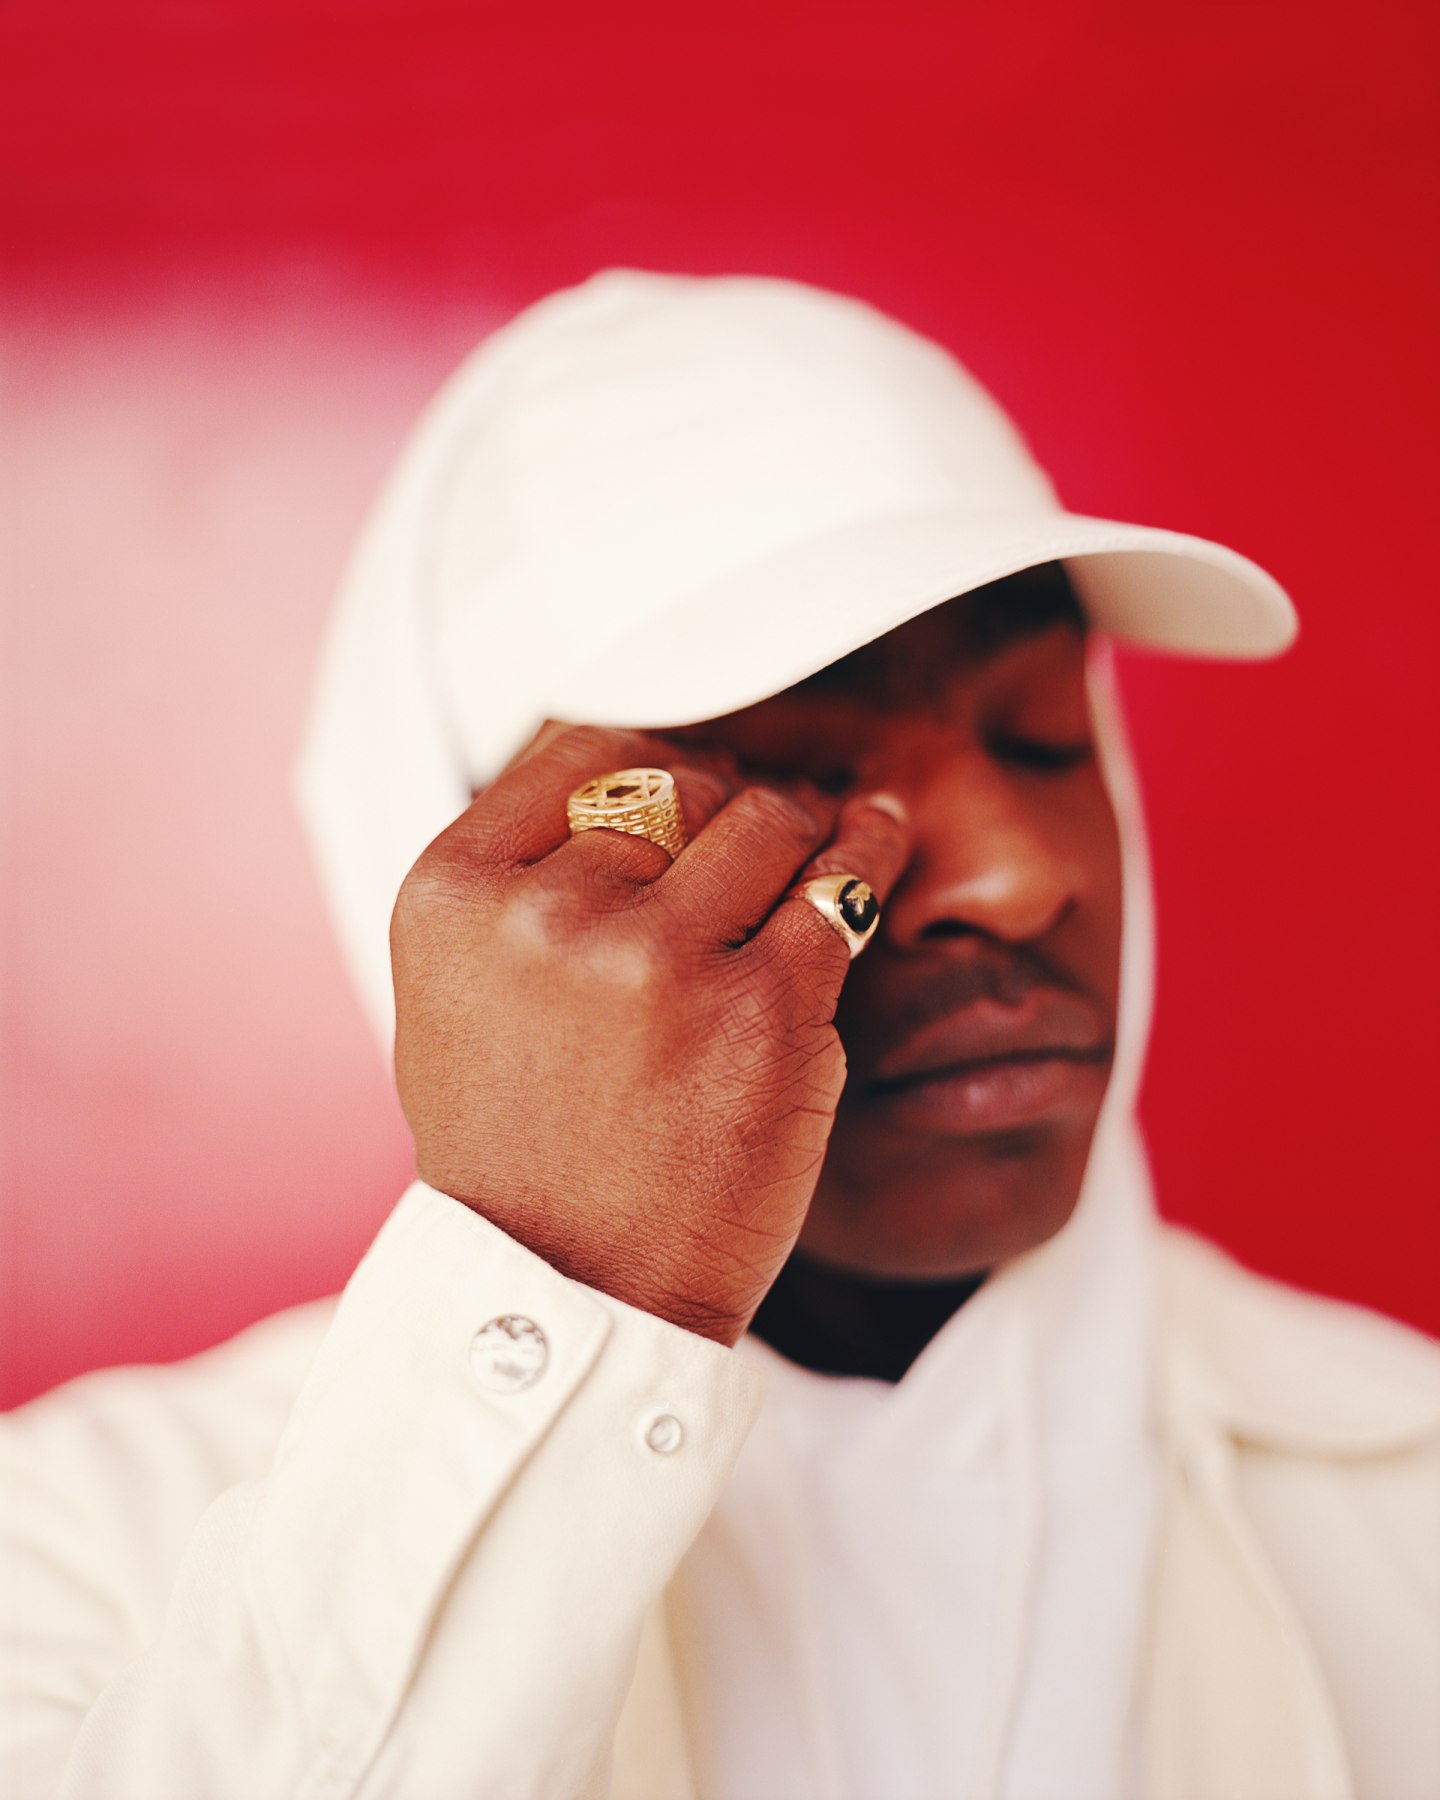 Skepta Reaches His Peak When He Stays True To Grime’s Roots